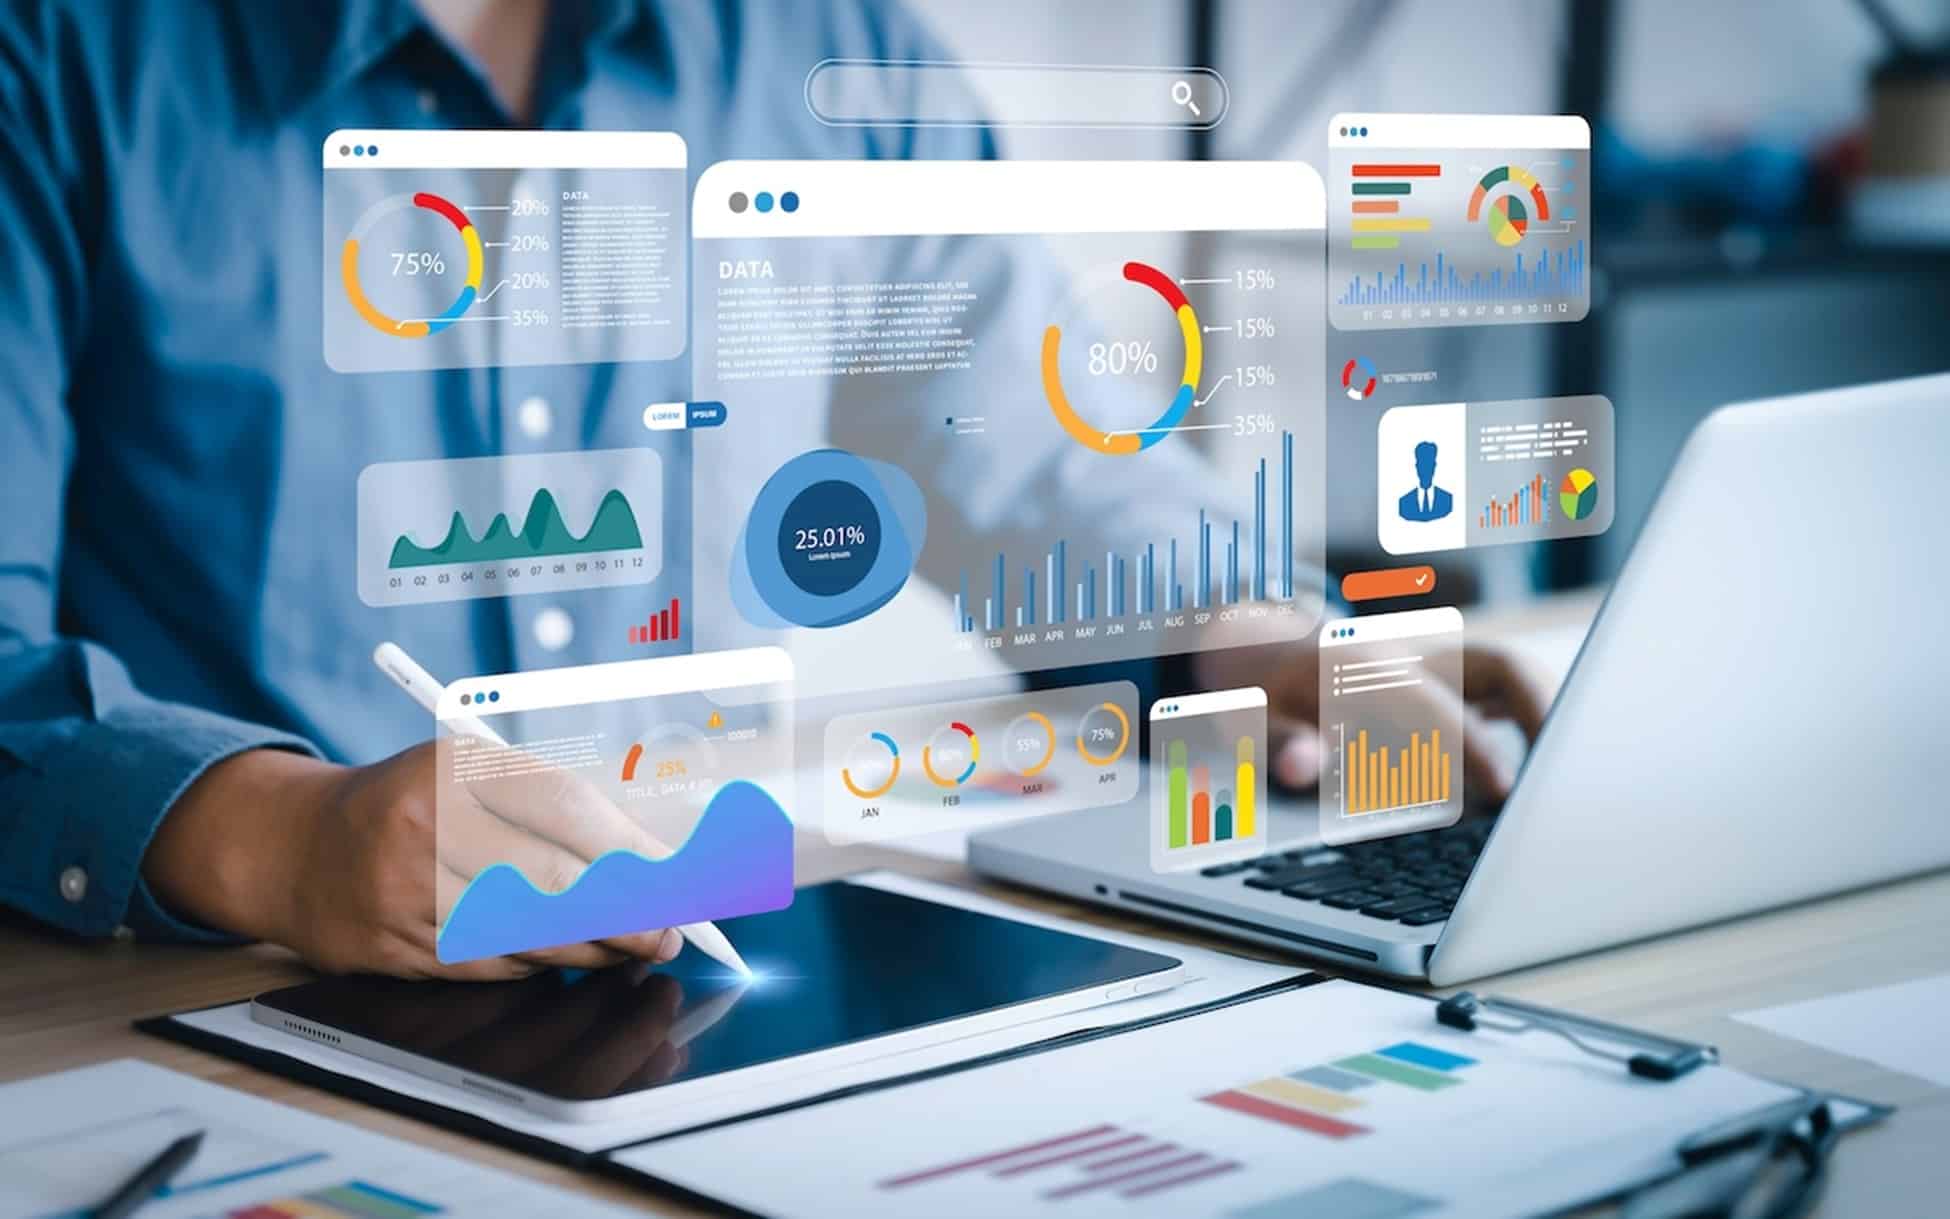 person on a laptop and tablet with icons floating in the showing what they are working on different charts and graphs